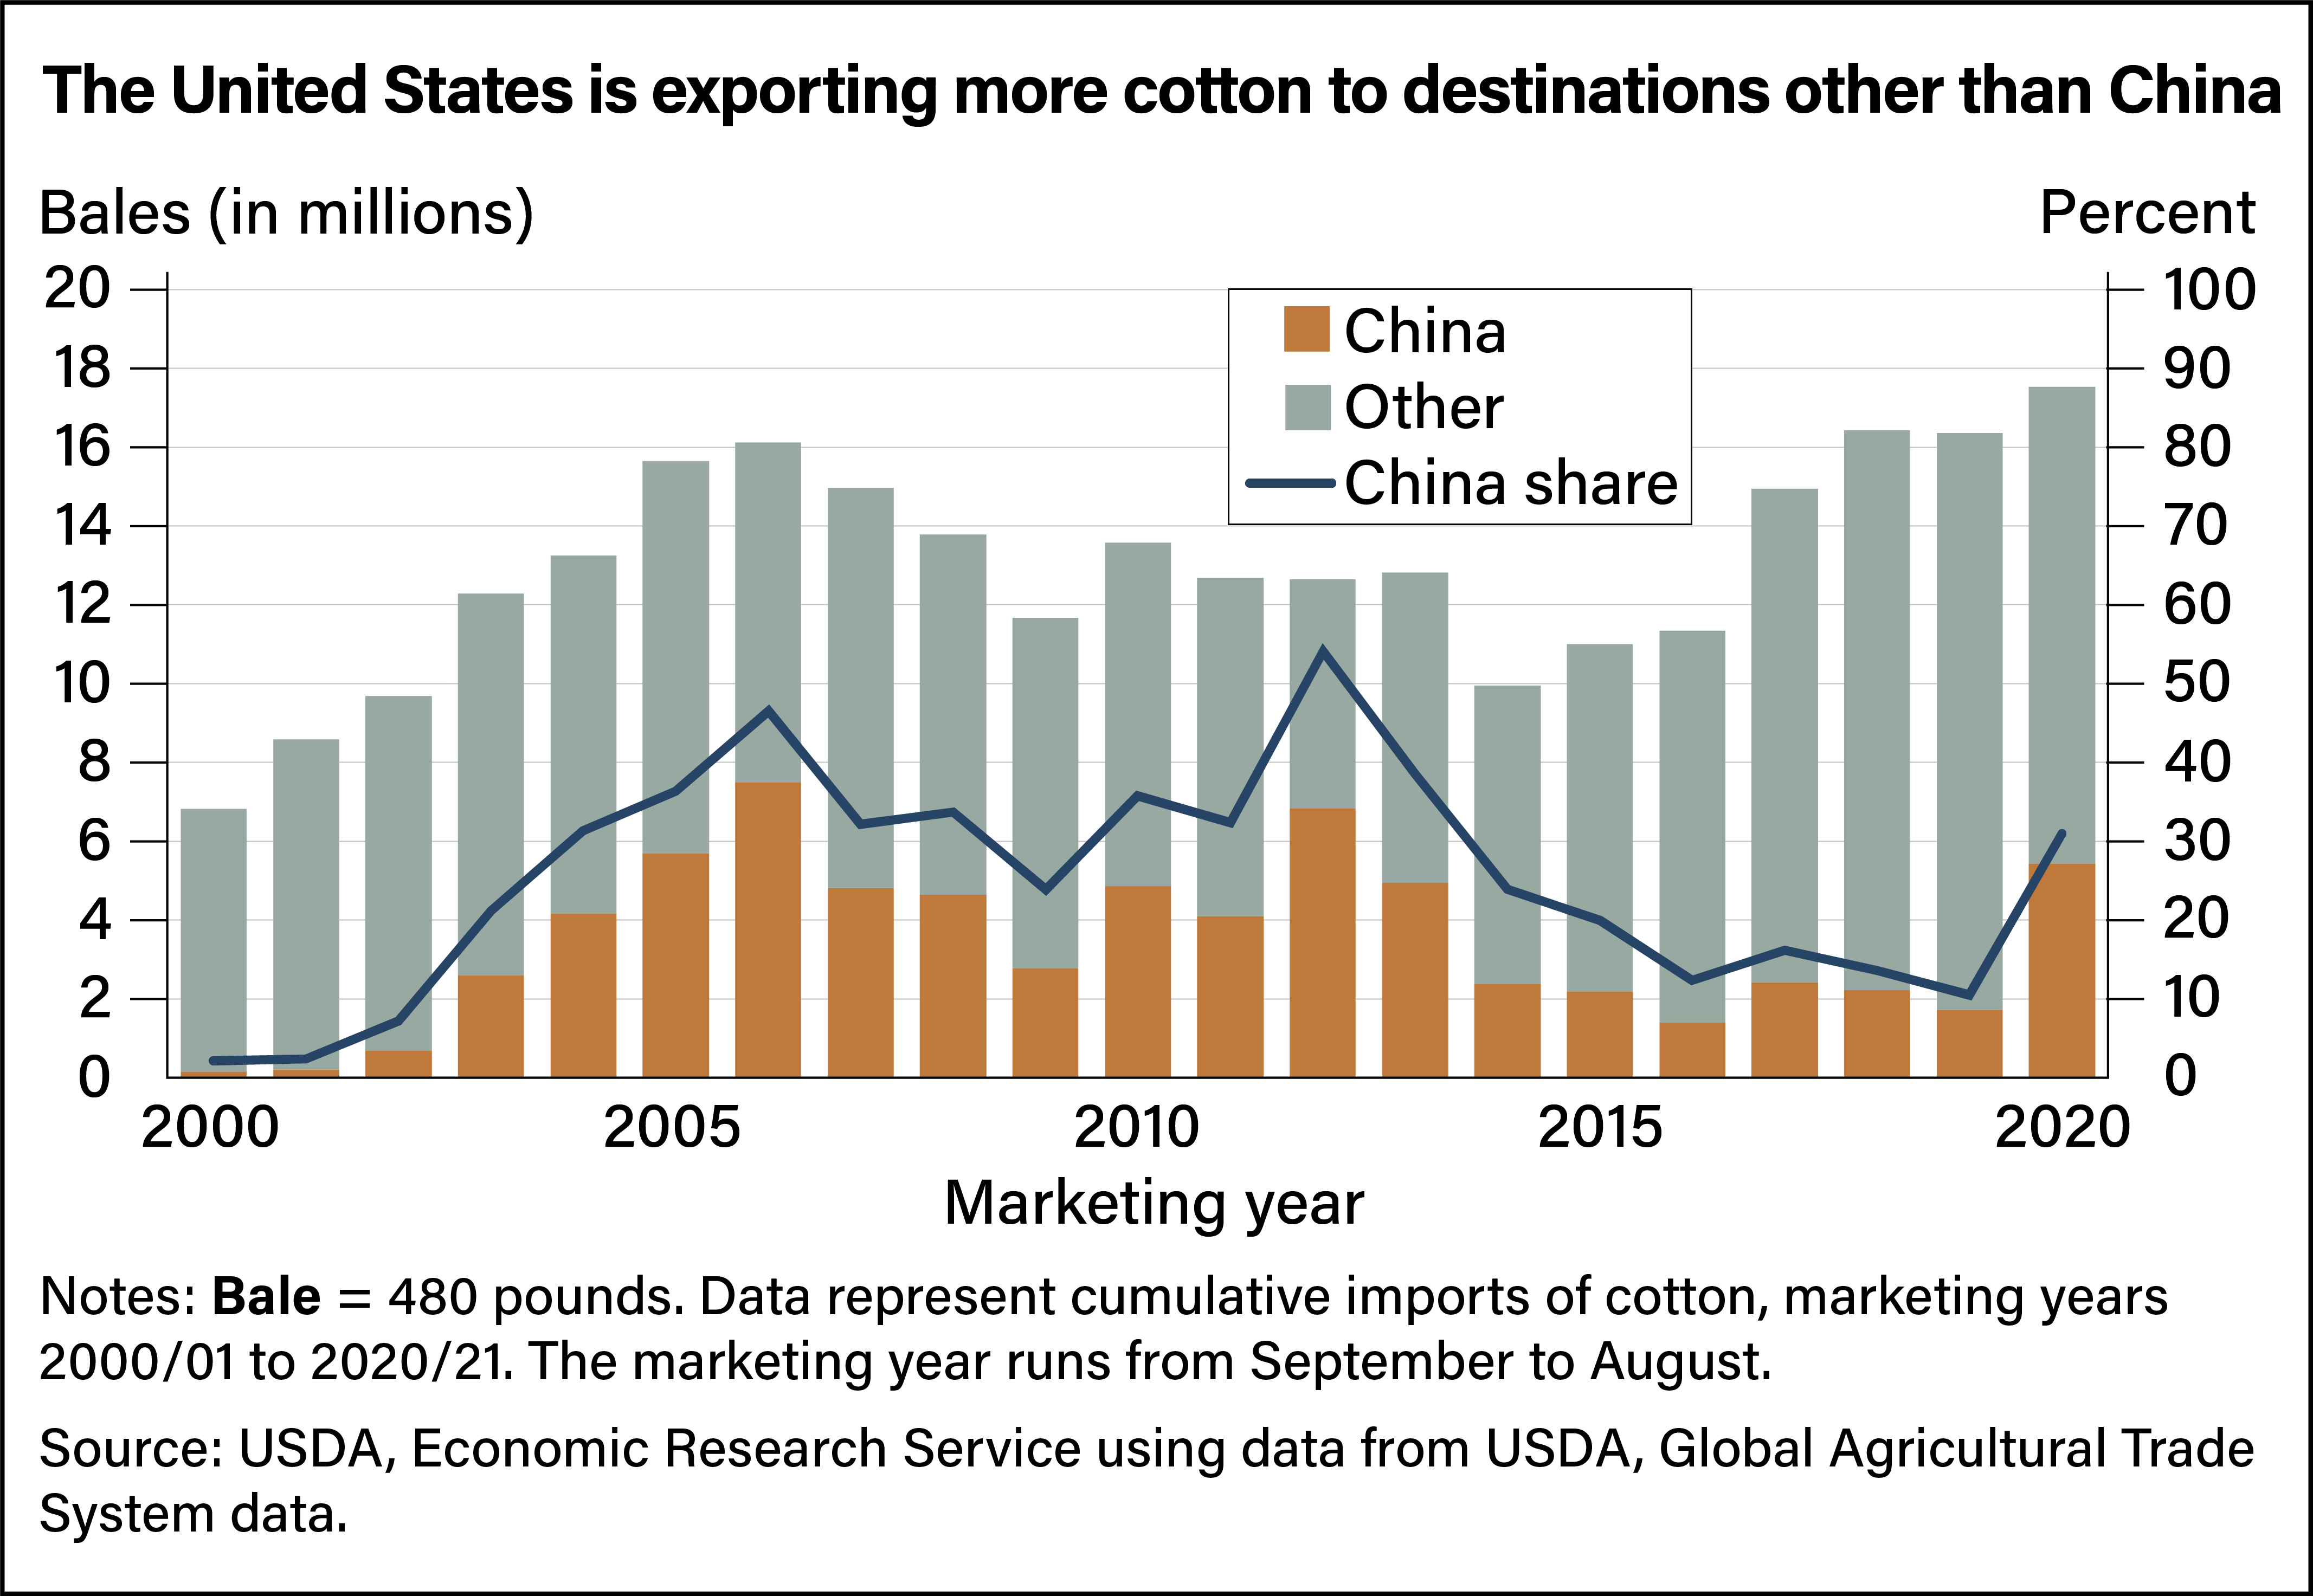 USDA ERS - Shift in Geography of China's Cotton Production Reshapes Global  Market